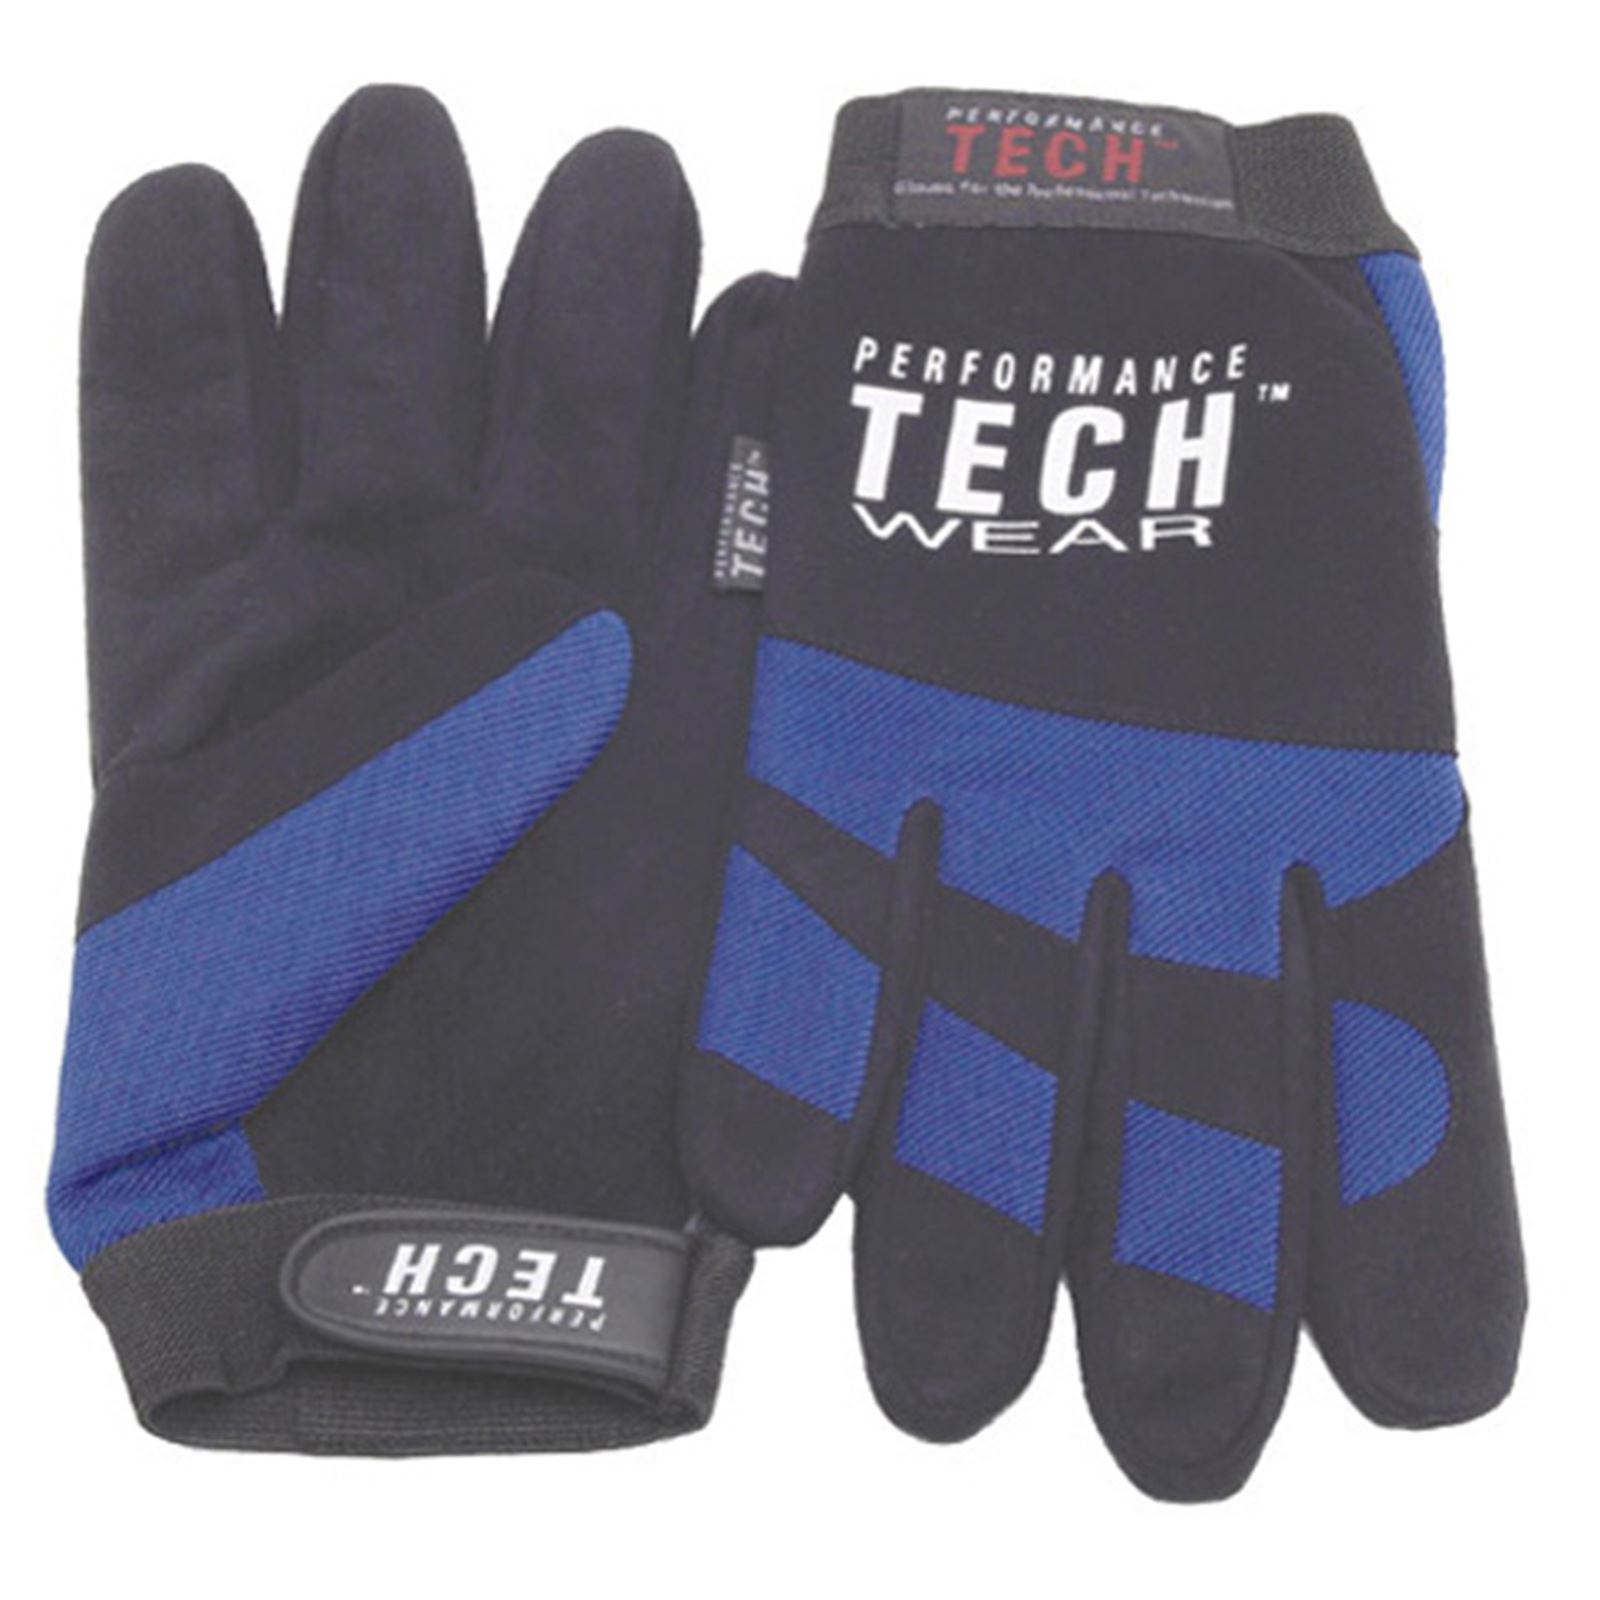 Performance Tool Tech Wear Gloves - Large